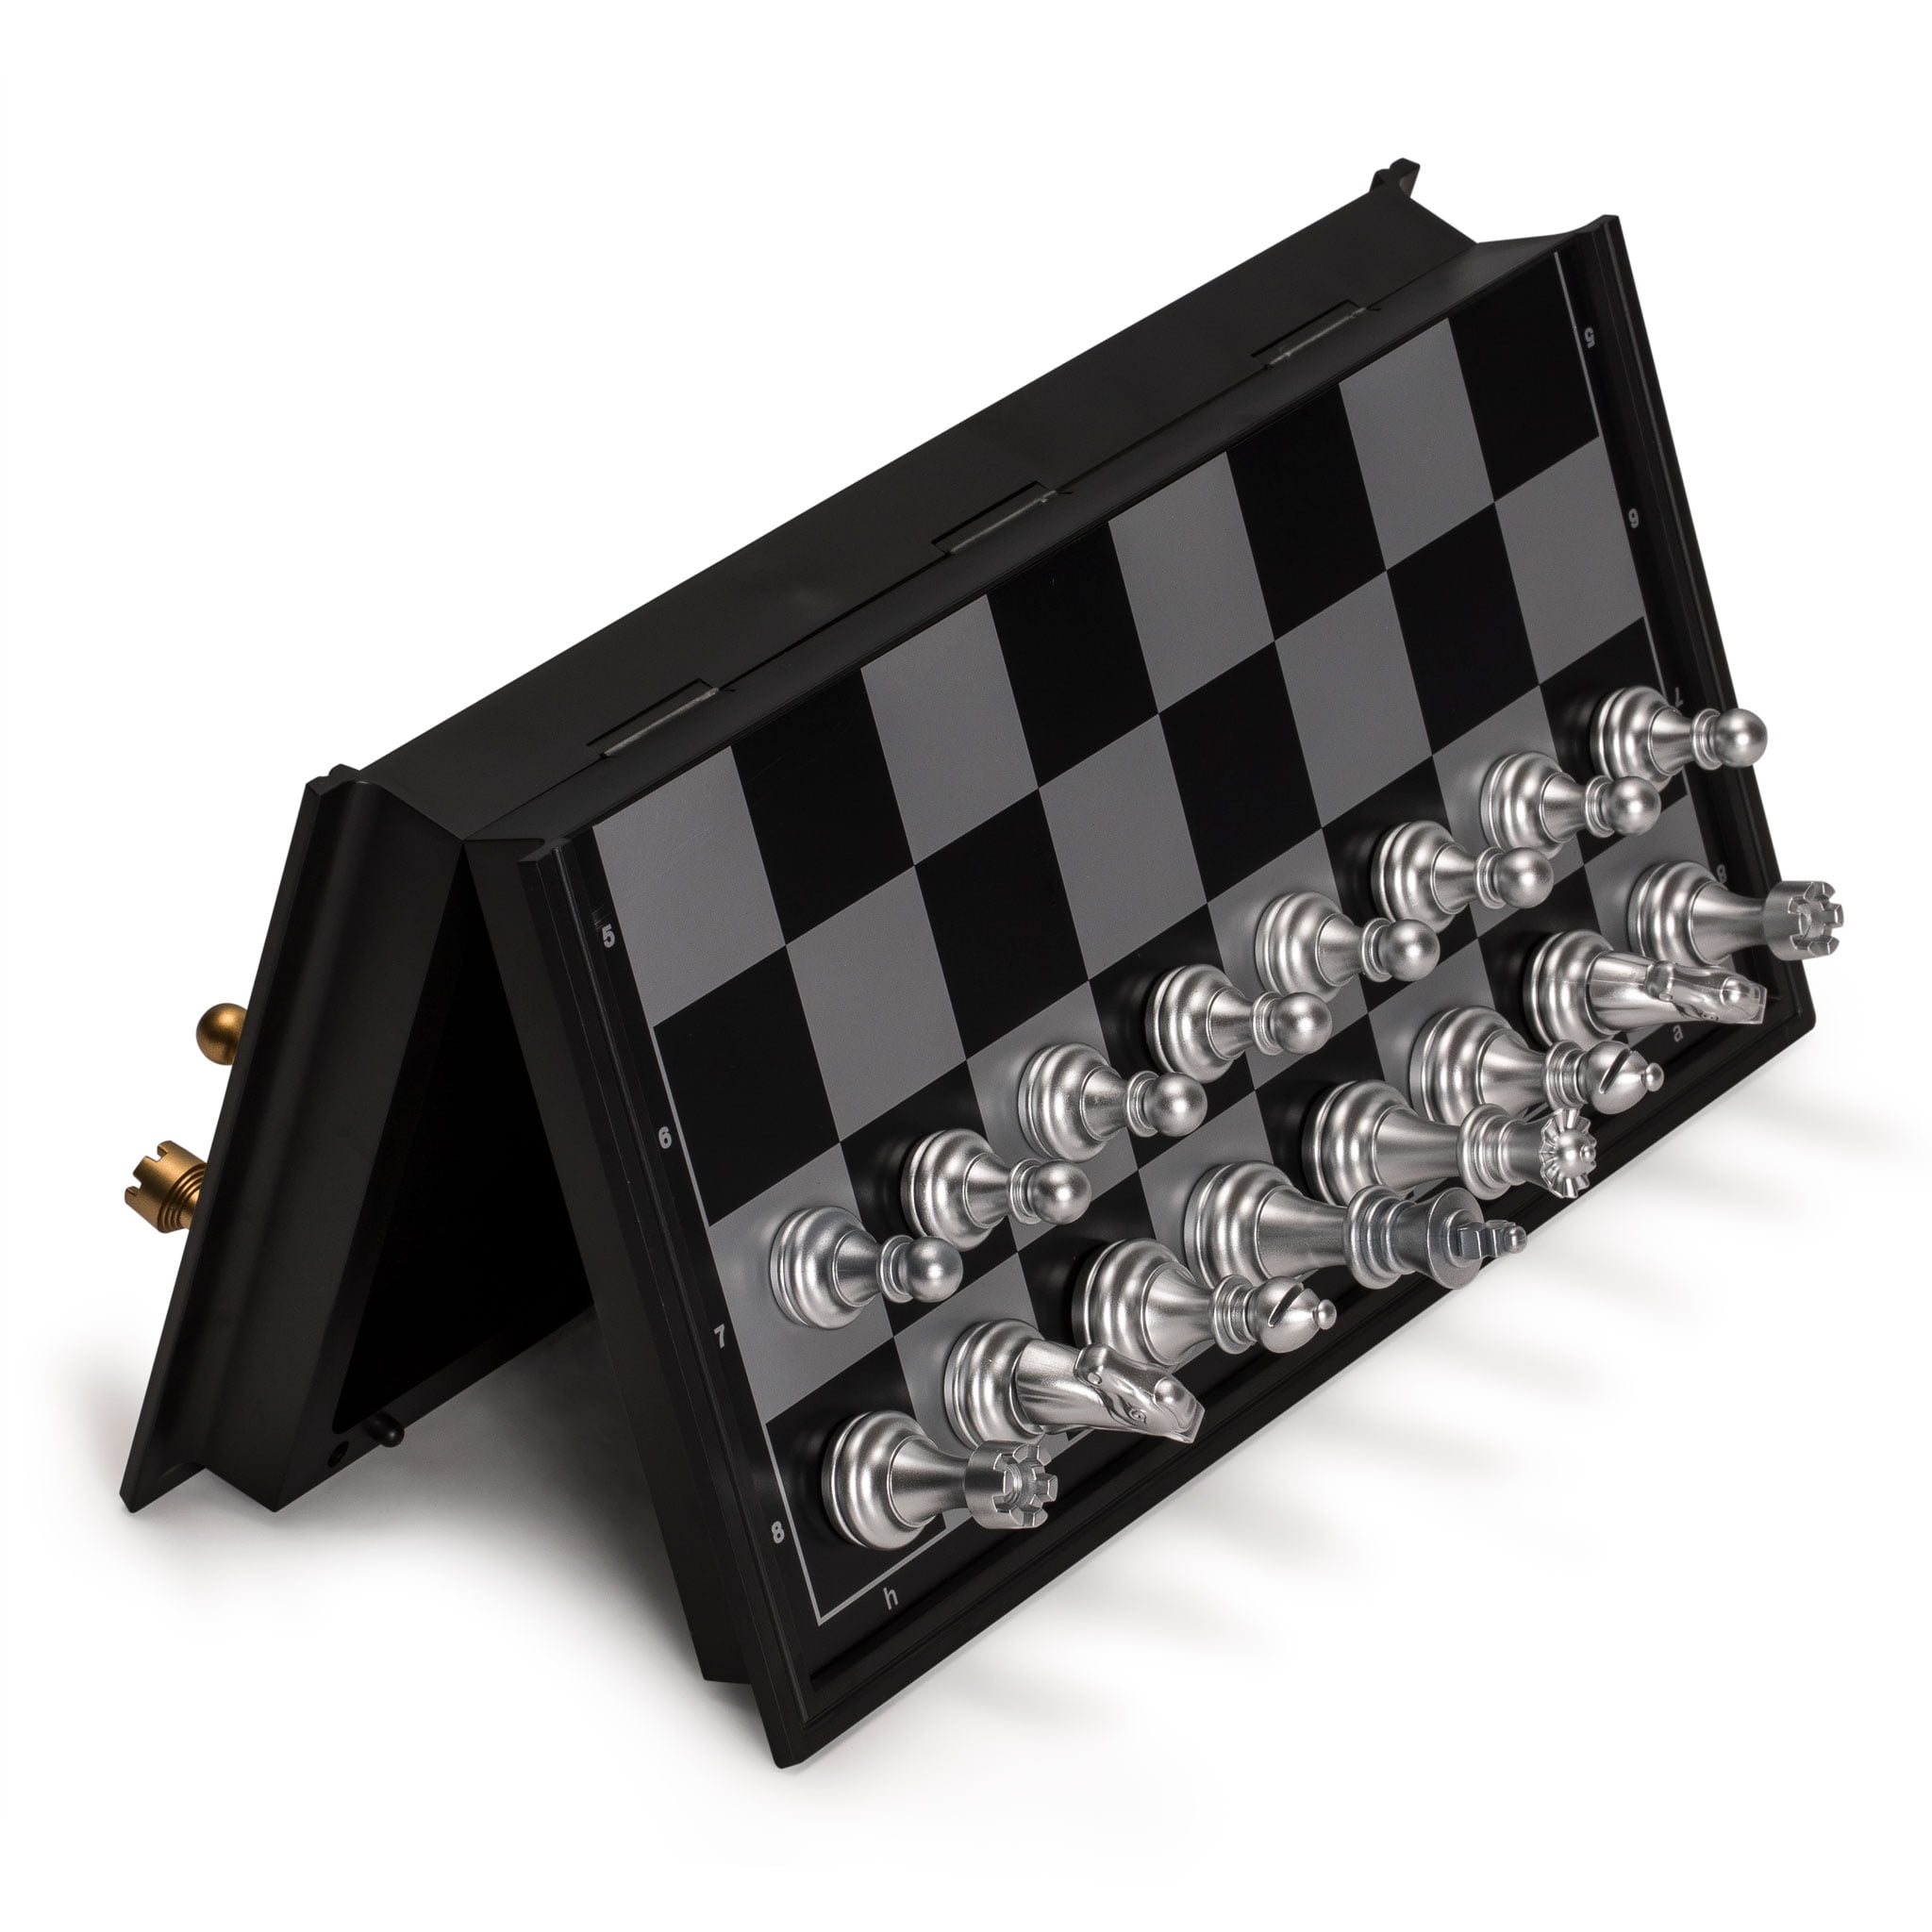 CHengQiSM Folding Magnetic Travel Chess Sets Portable Game Board price in  UAE,  UAE